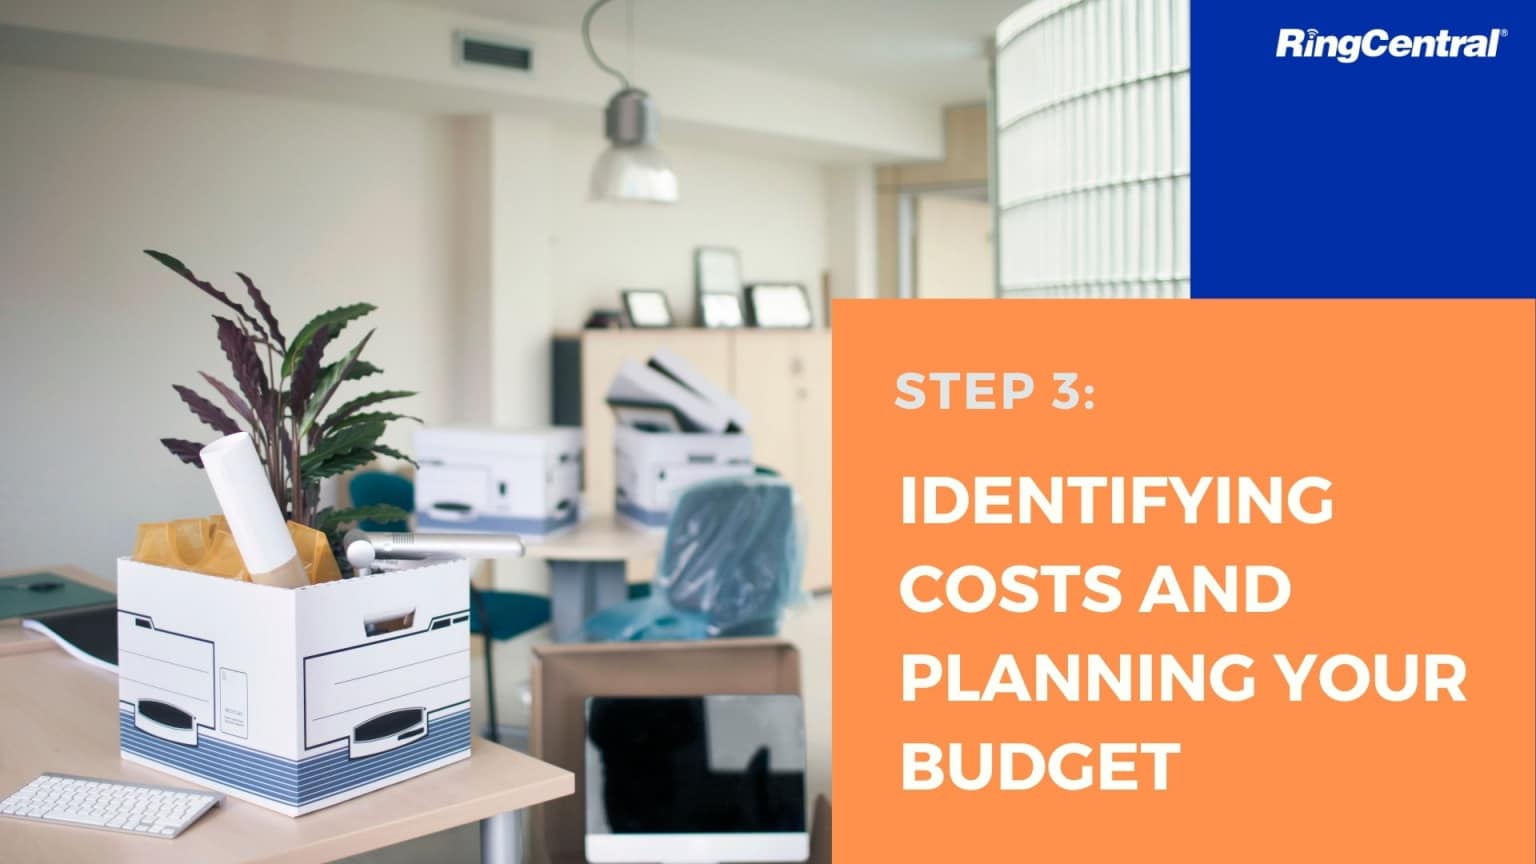 Moving Office - Identifying costs and planning your budget